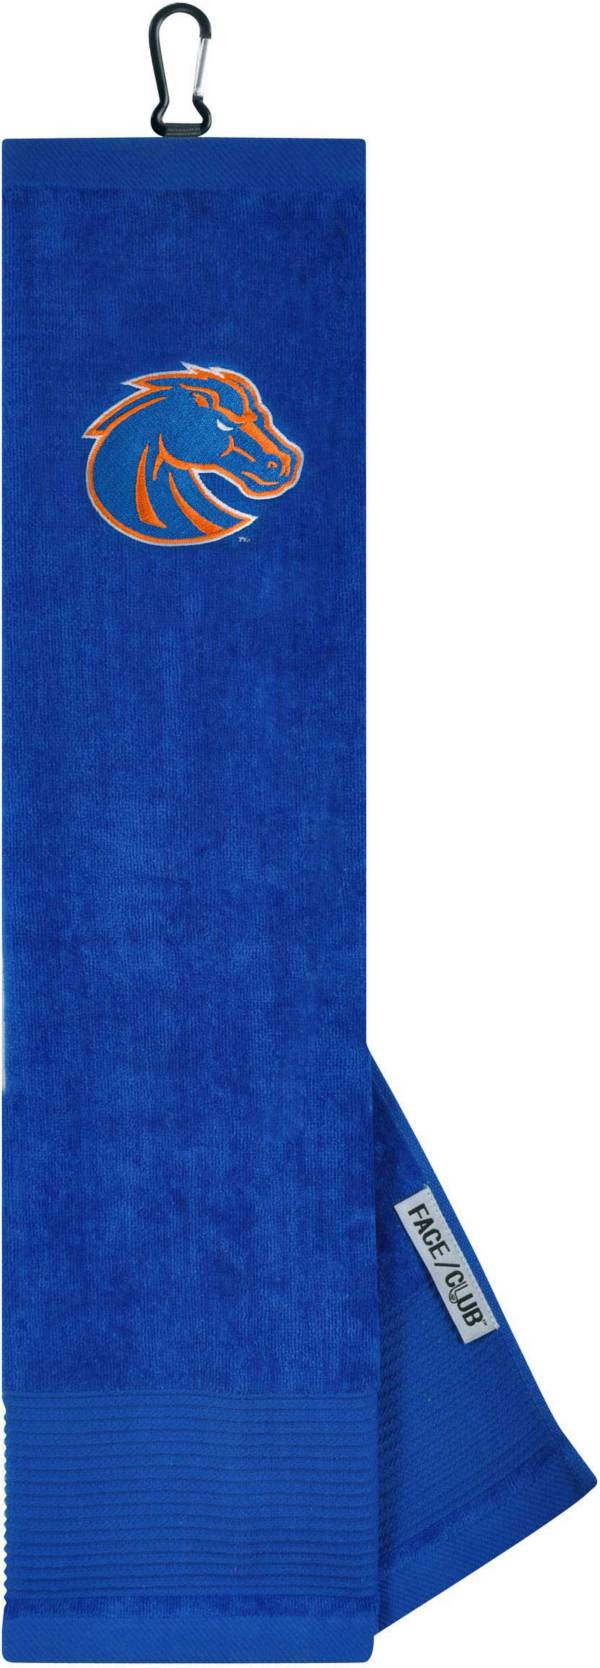 Team Effort Boise State Broncos Embroidered Face/Club Tri-Fold Towel product image